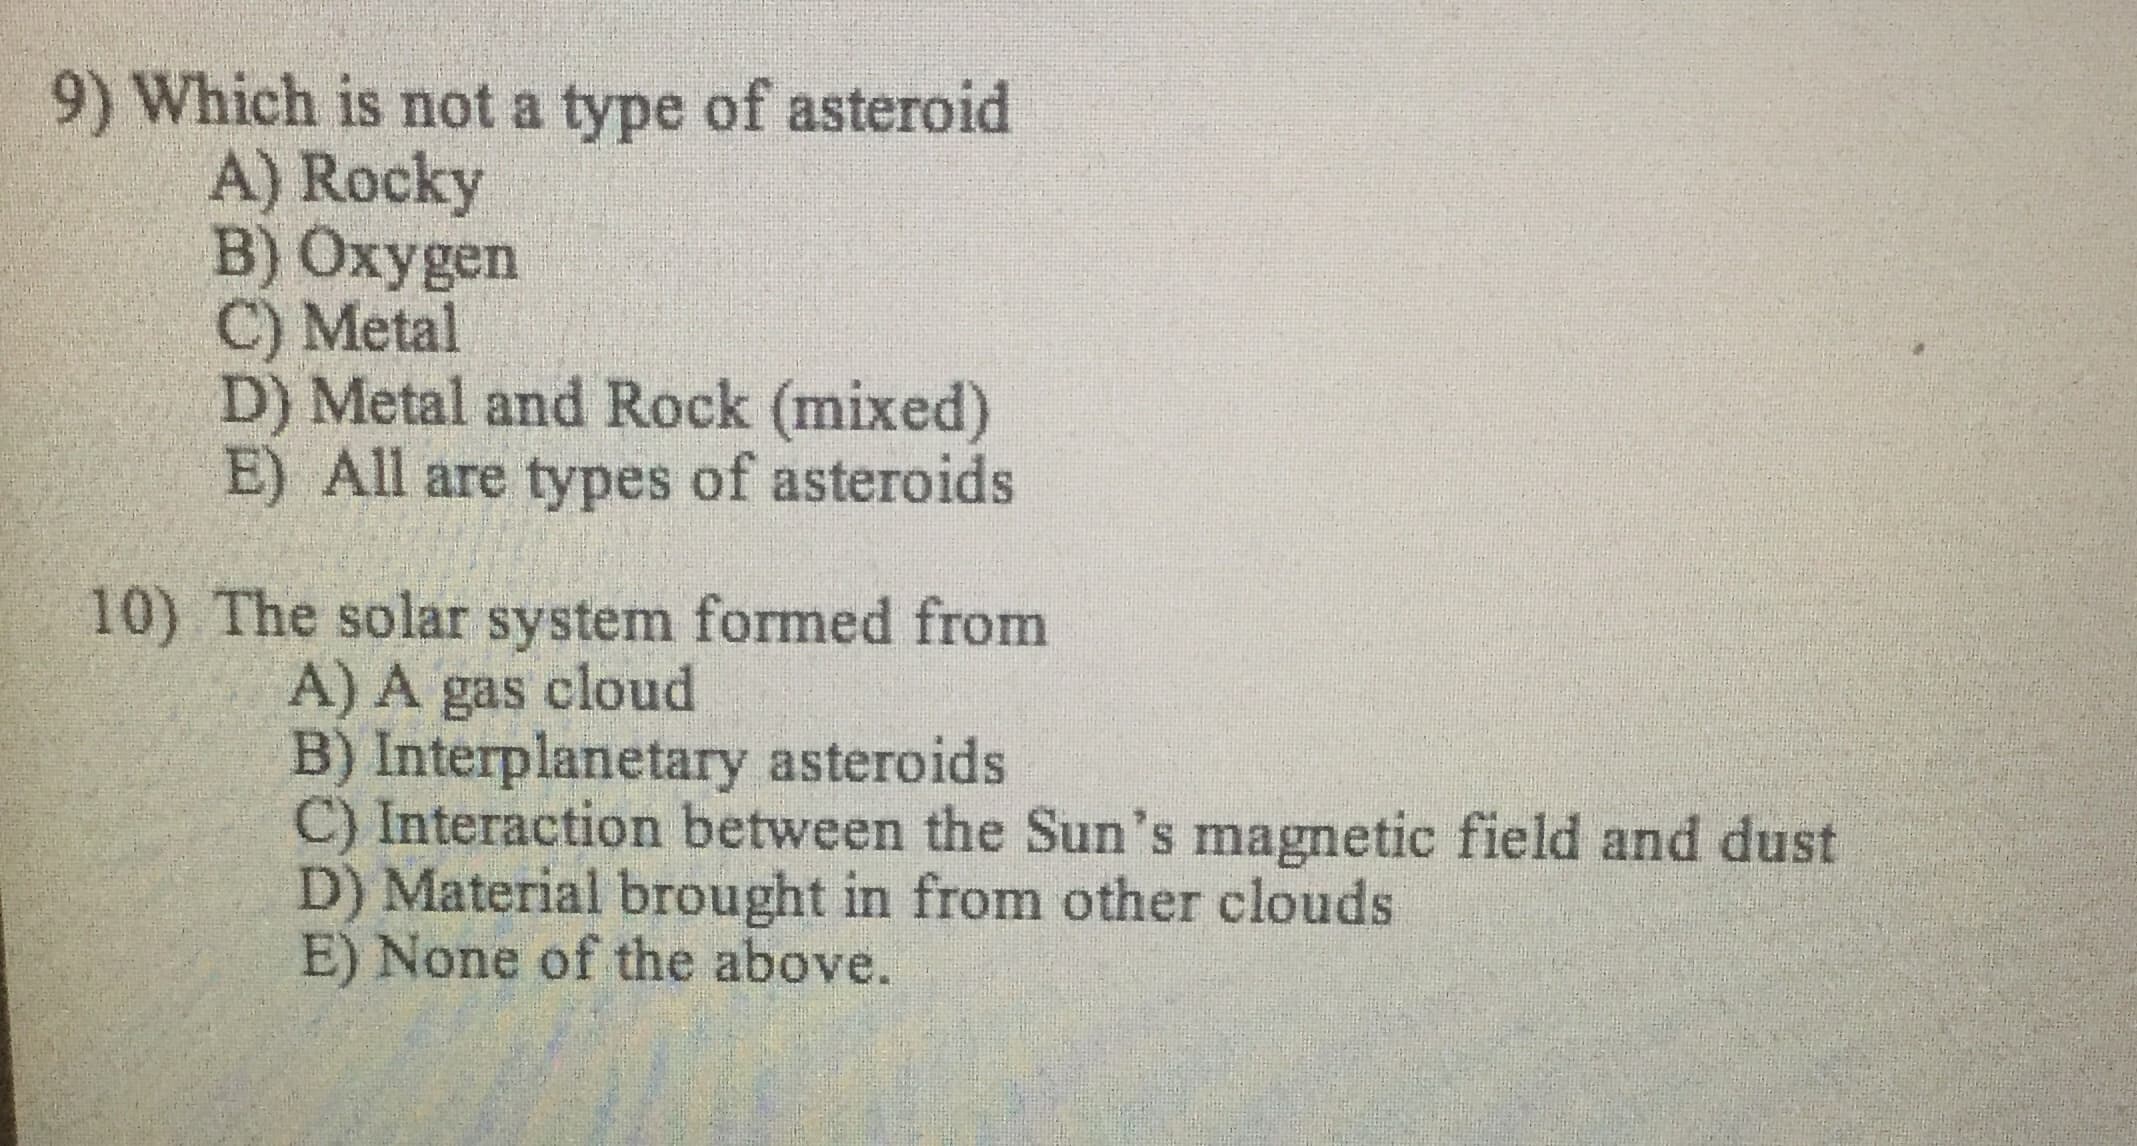 Which is not a type of asteroid
A) Rocky
B) Oxygen
C) Metal
D) Metal and Rock (mixed)
E) All are types of asteroids
0) The solar system formed from
A) A gas cloud
B) Interplanetary asteroids
C) Interaction between the Sun's magnetic field and dust
D) Material brought in from other clouds
E) None of the above.
